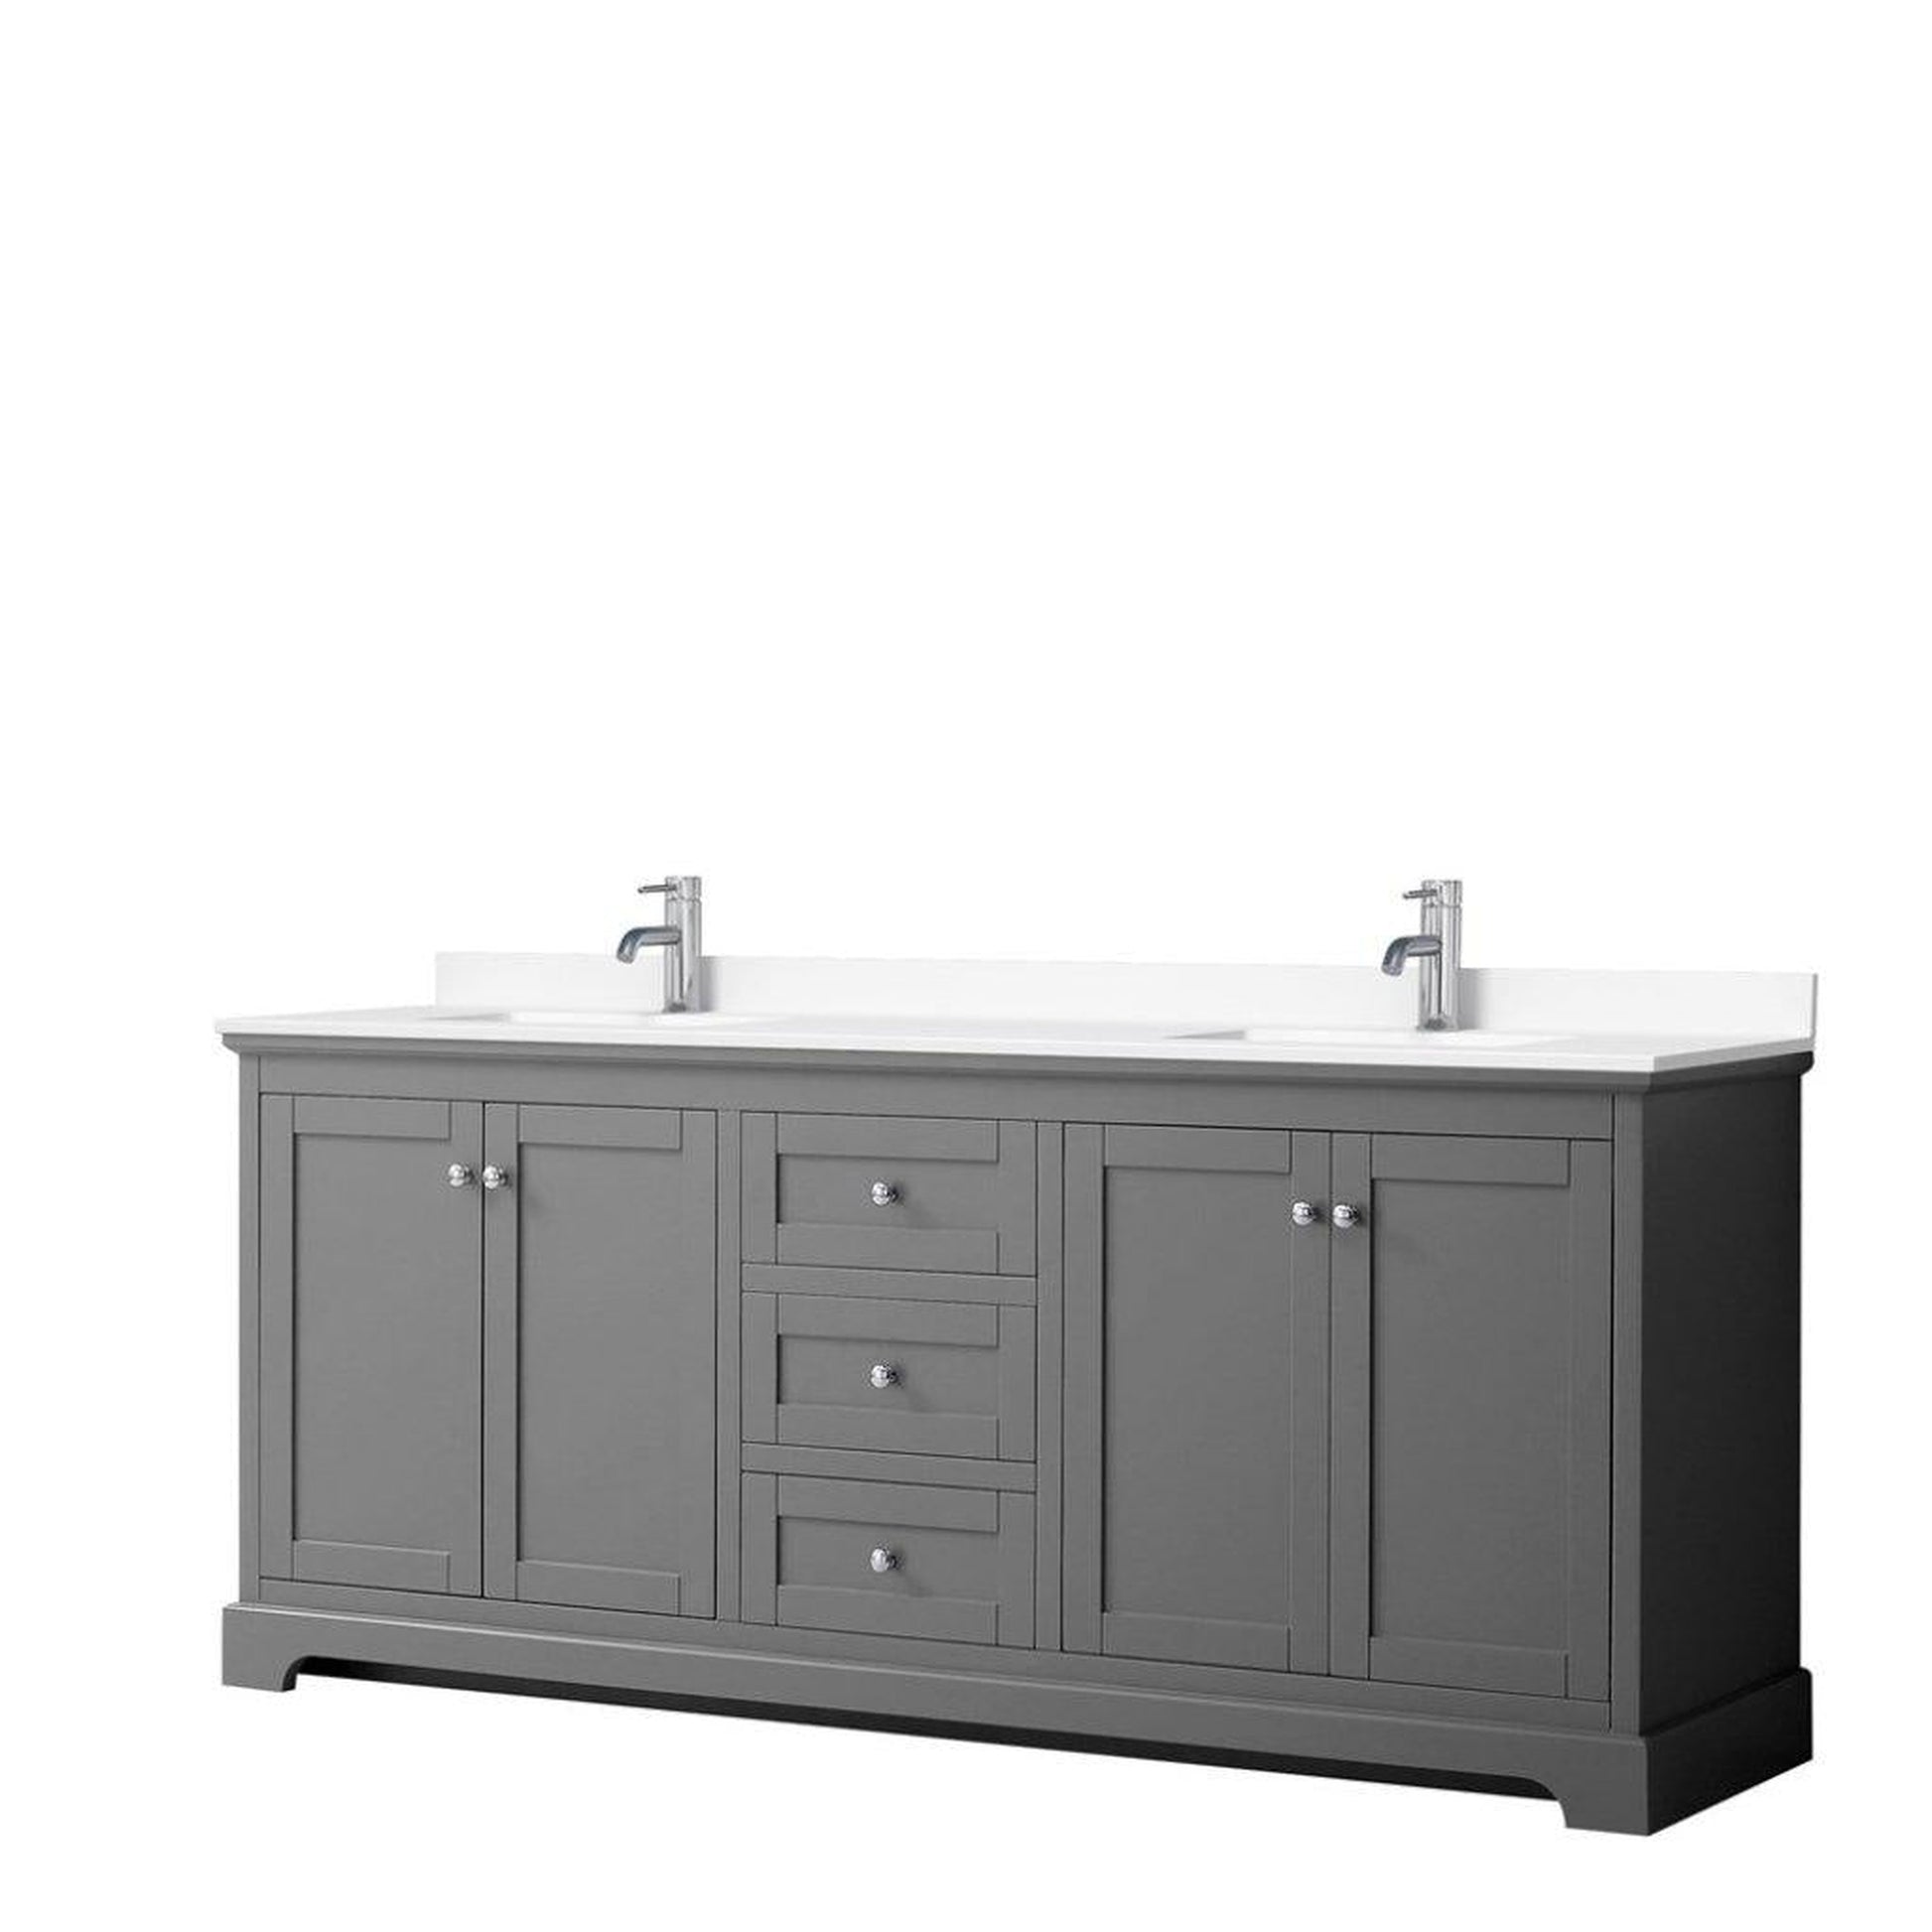 Wyndham Collection Avery 80" Dark Gray Double Bathroom Vanity With White Cultured Marble Countertop With 1-Hole Faucet And Square Sink